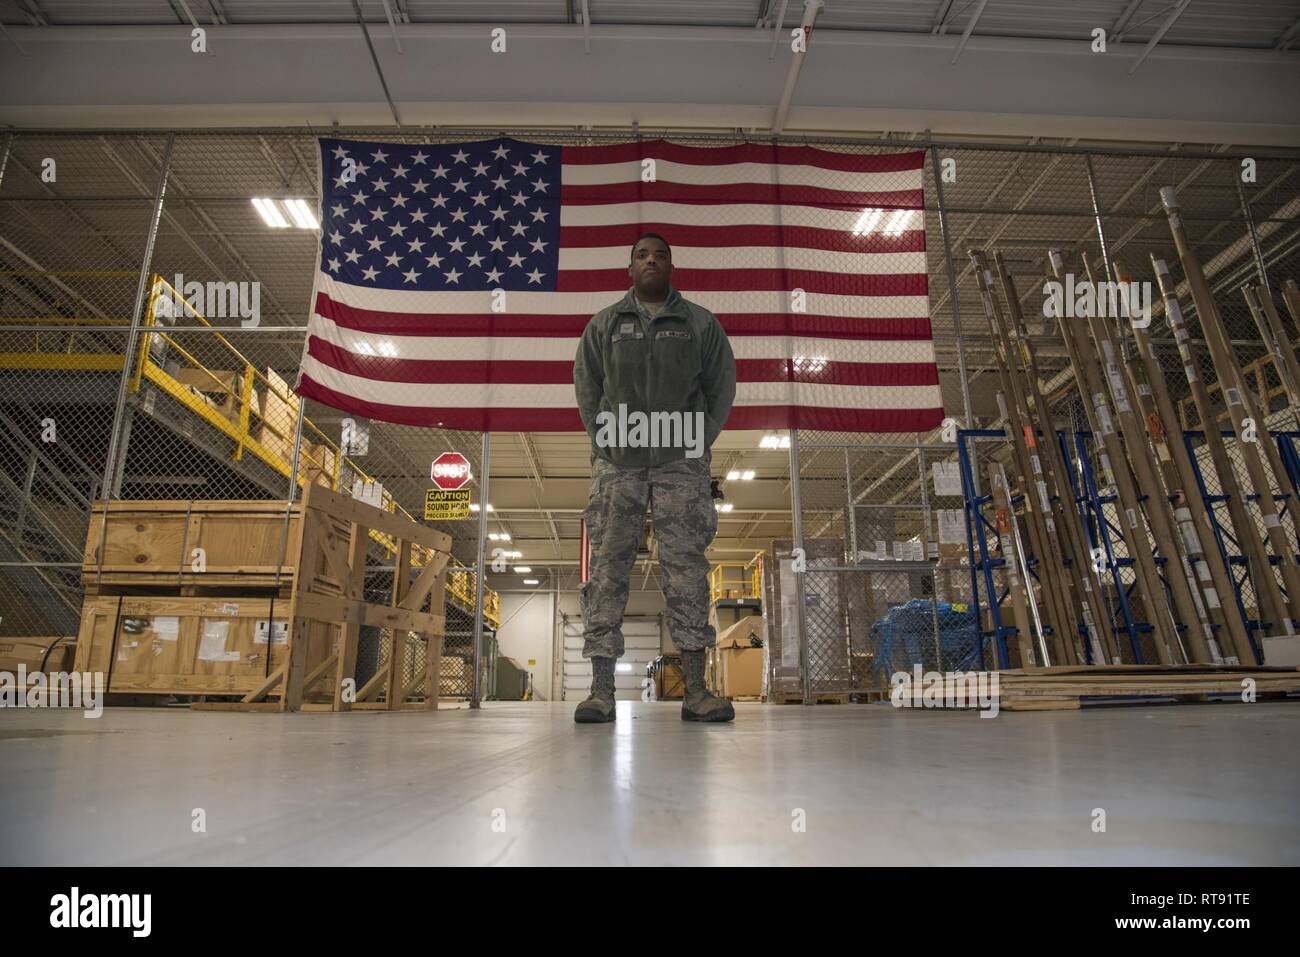 Airman Anthony Lemarc Cole Jr., a traffic management specialist, 108th Logistics Readiness Squadron, poses for a photo in the LRS supply warehouse at Joint Base McGuire-Dix-Lakehurst, N.J., Feb. 4, 2019. As a TMO specialist, Cole's duties include packaging, classifying, and arranging personal property and cargo for shipment or storage across the globe via air, ground, rail & vessel transportation. Stock Photo